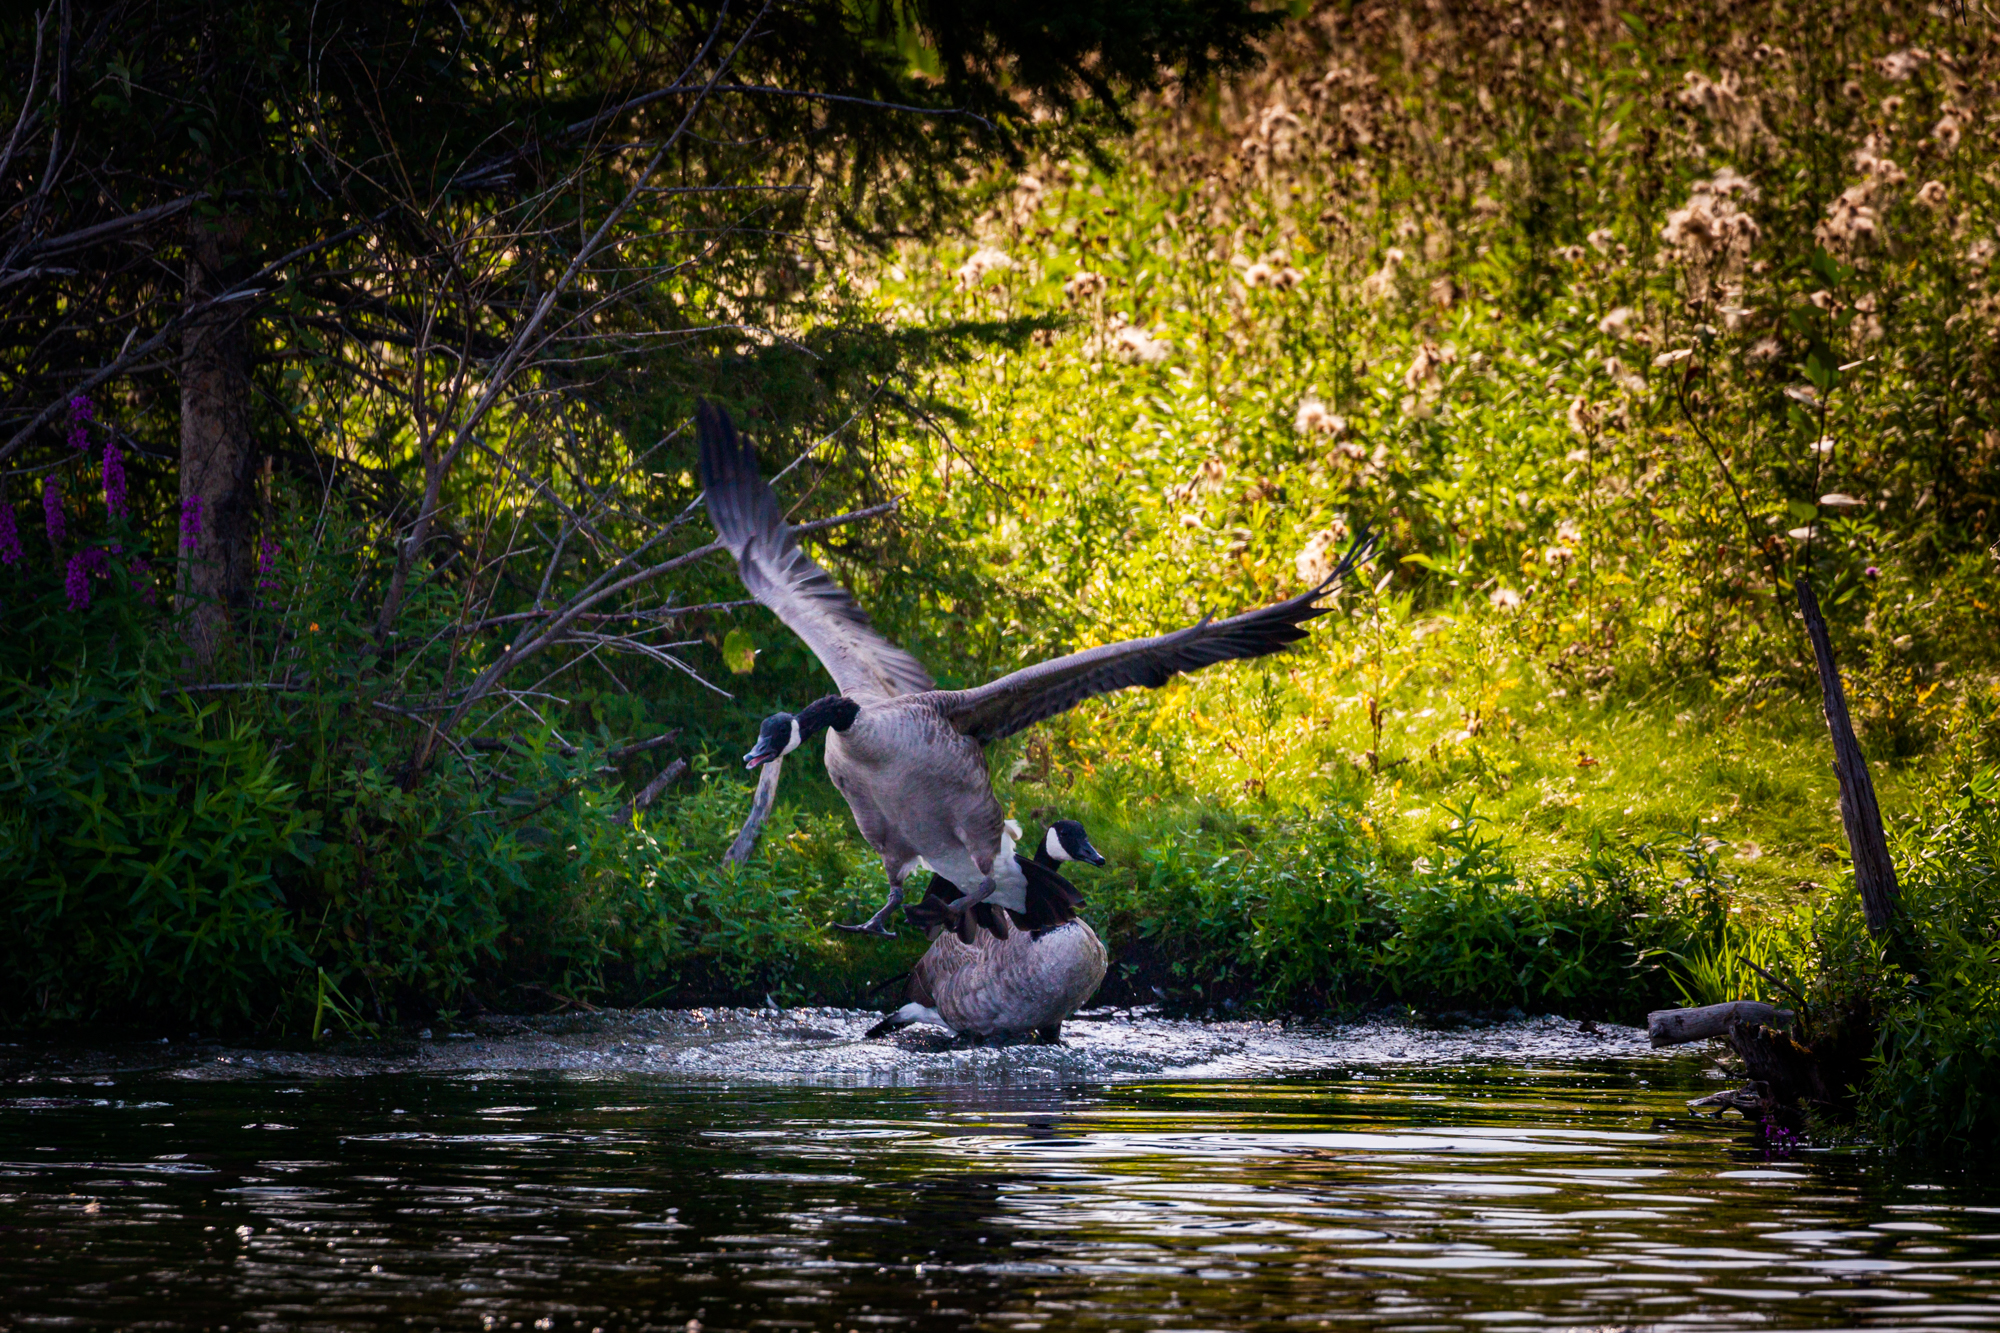 Photo of the two geese in the cove. The one in the water hasn't moved. The flying goose is mid-air and coming in for a landing on the water. Green trees and foliage are present in the background.